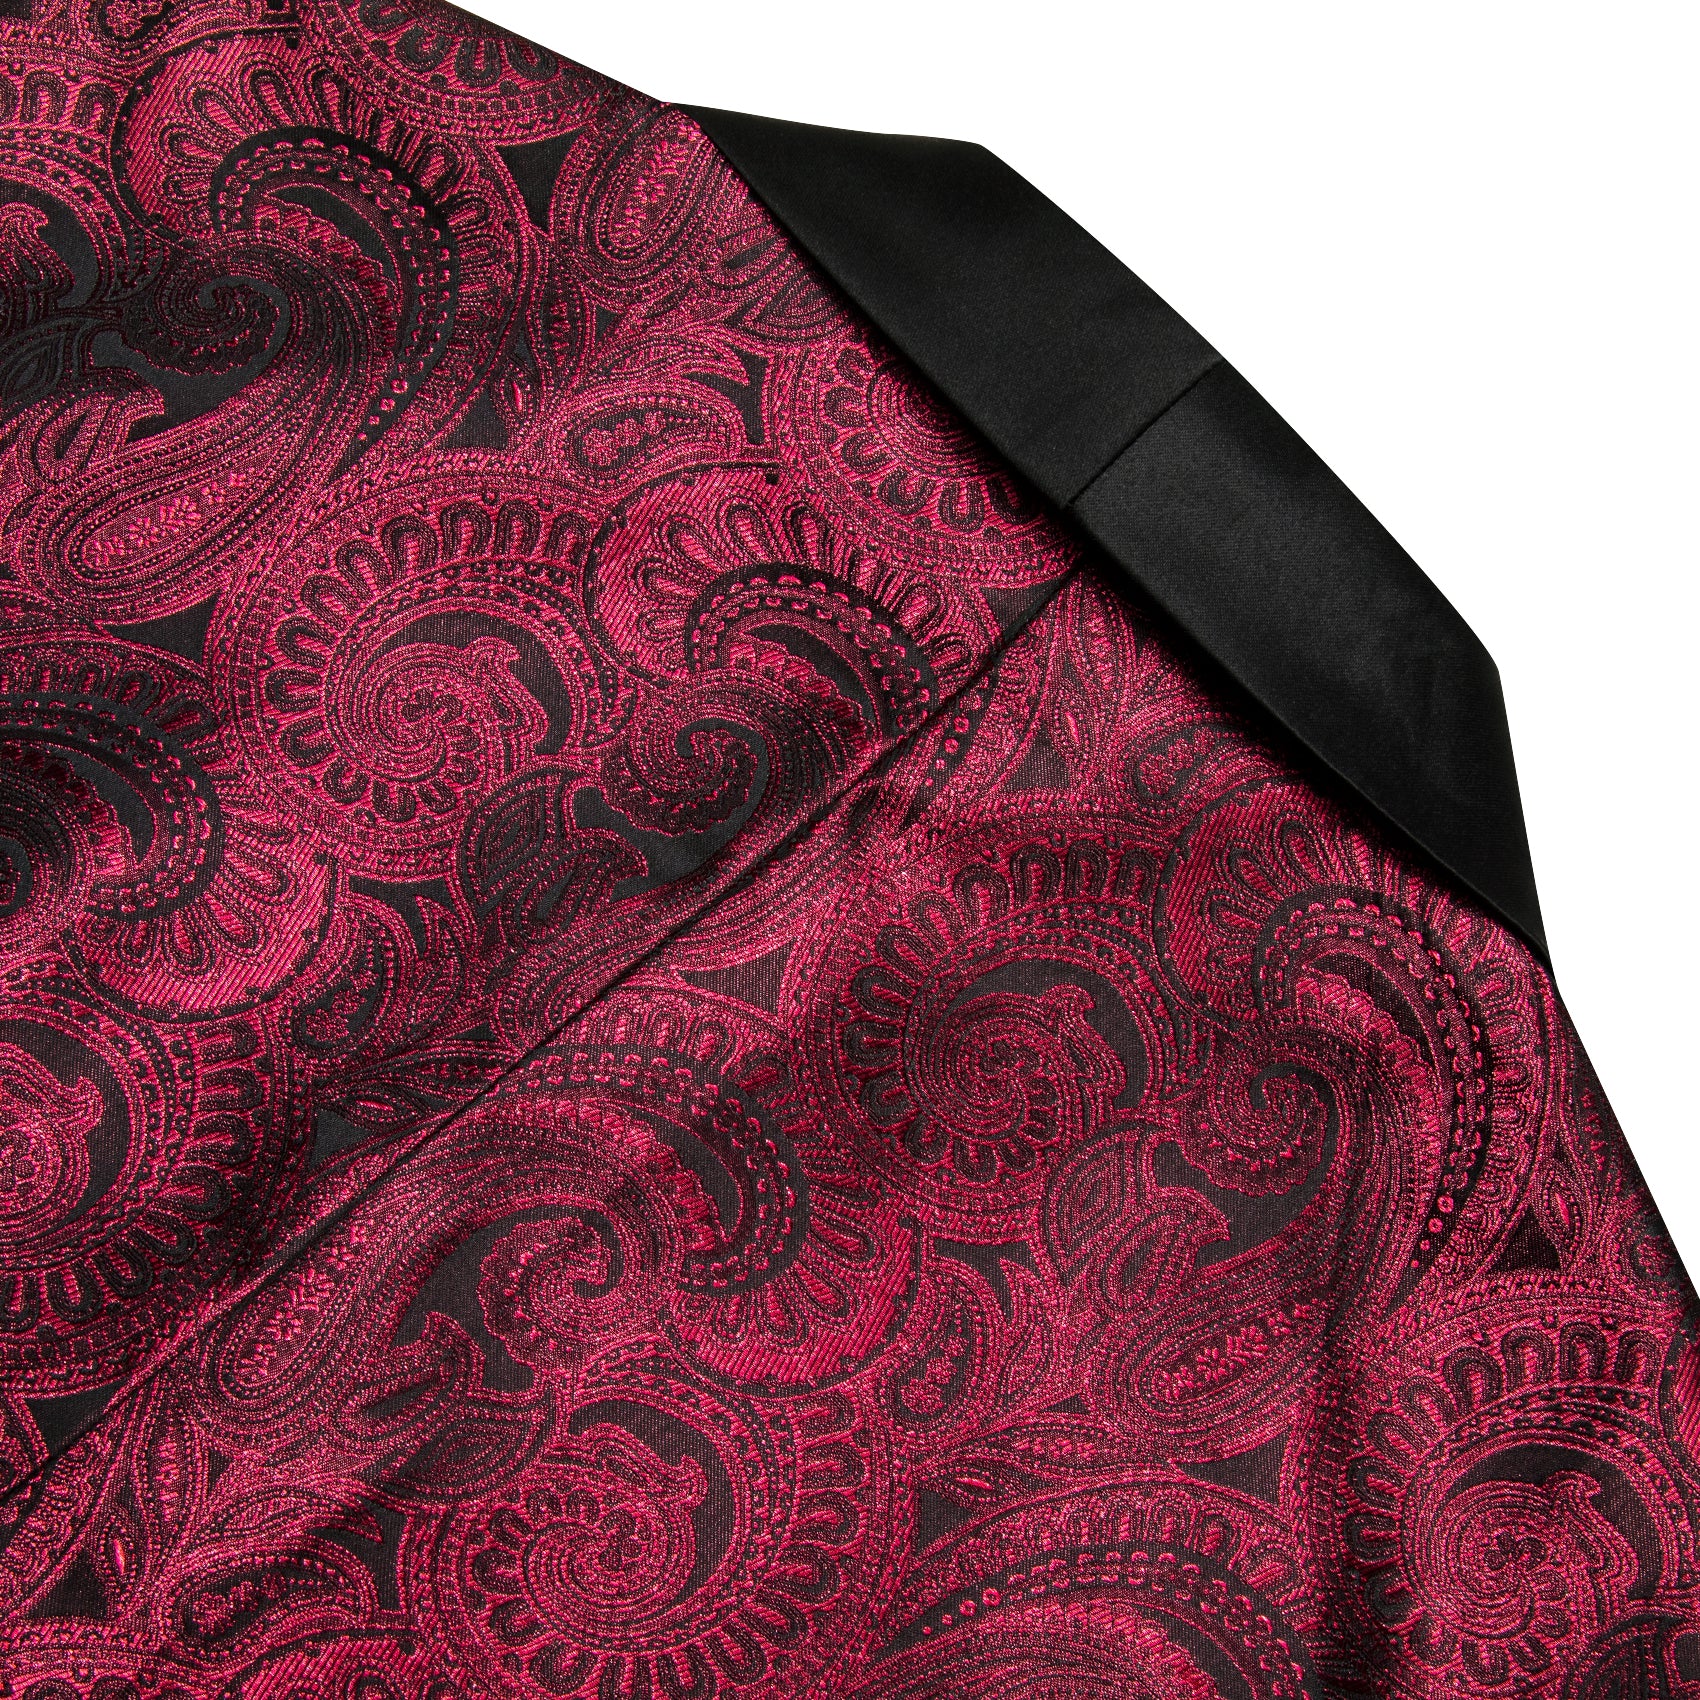 Barry.wang Men's Suit Dark Red Jacquard Silk Floral Shawl Collar Suit